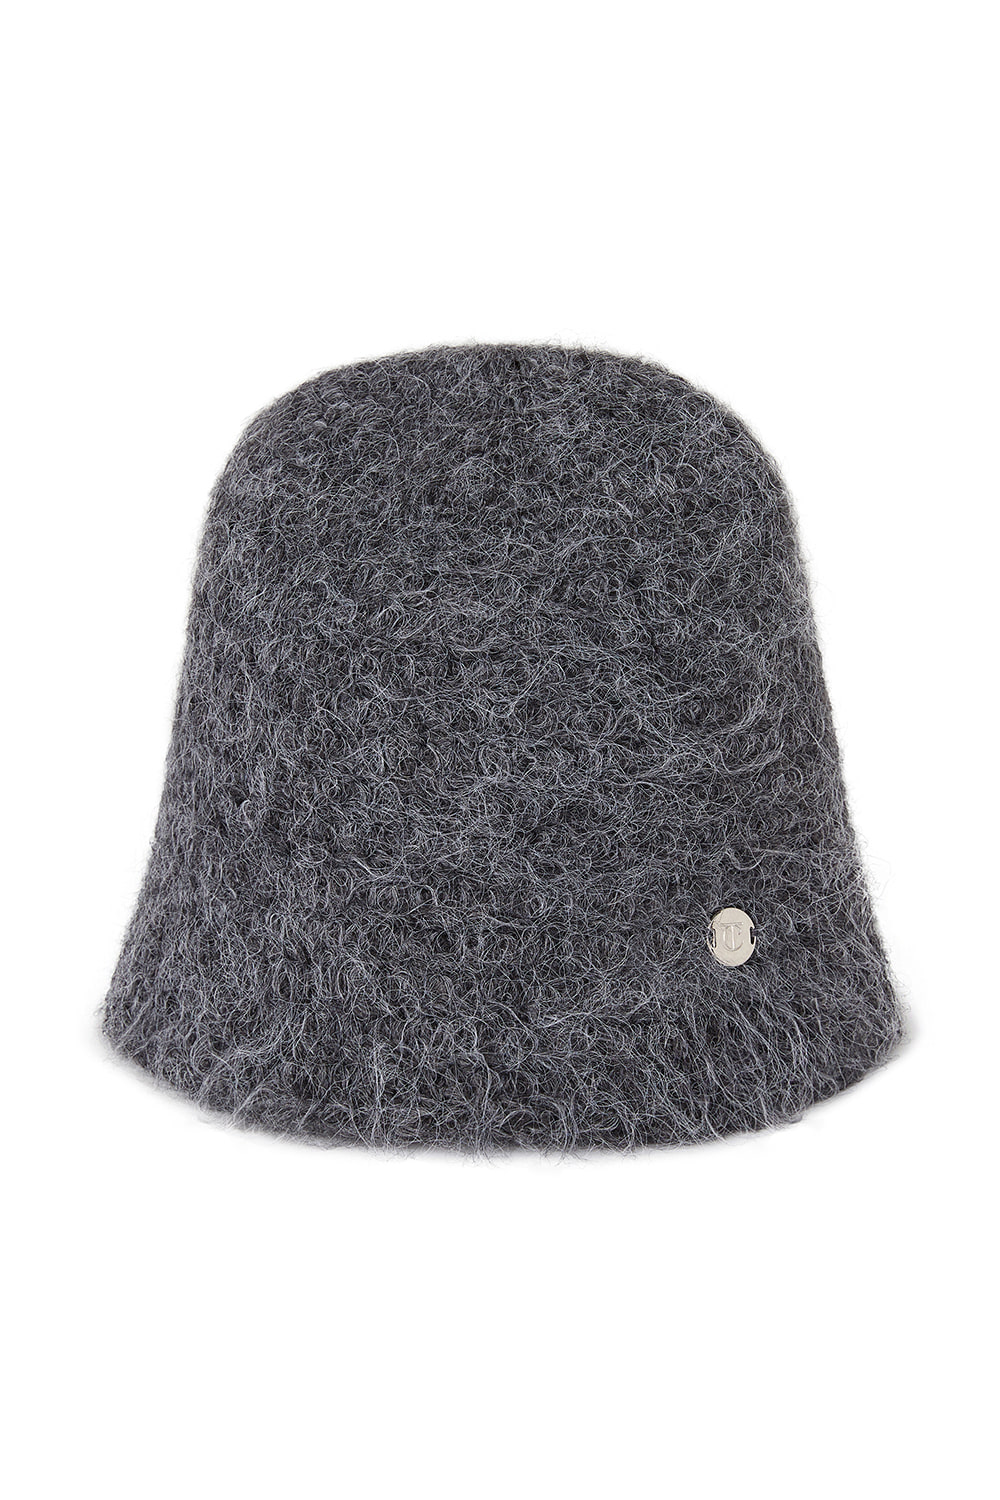 HAIRY KNIT BUCKET HAT [CHARCOAL]		